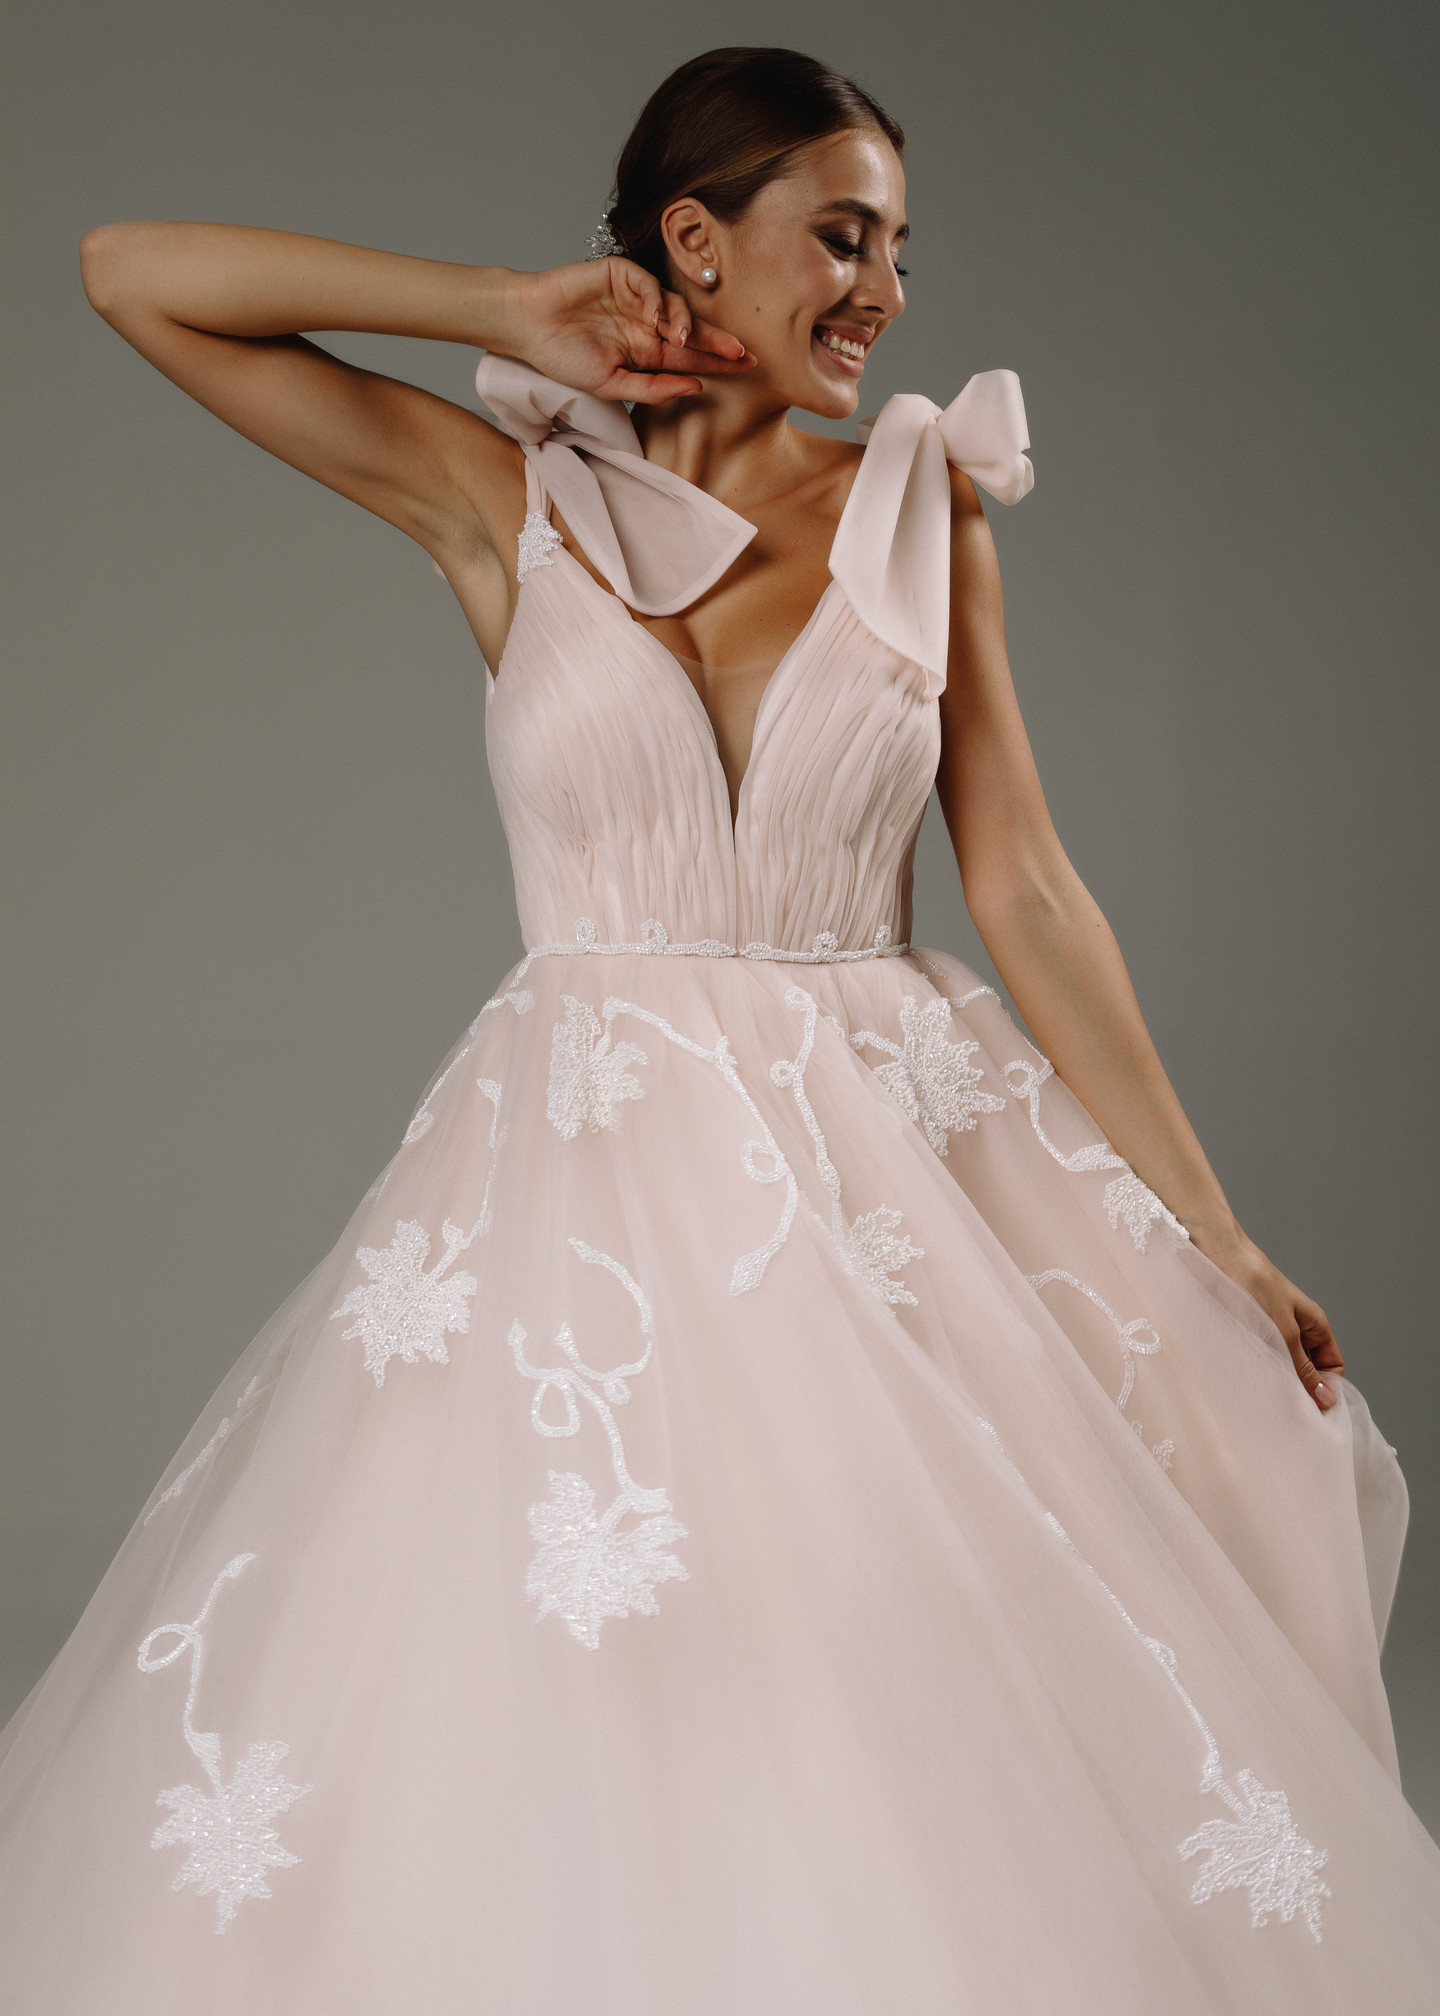 Lukerya gown, 2020, couture, dress, bridal, powder color, tulle, embroidery, A-line, archive